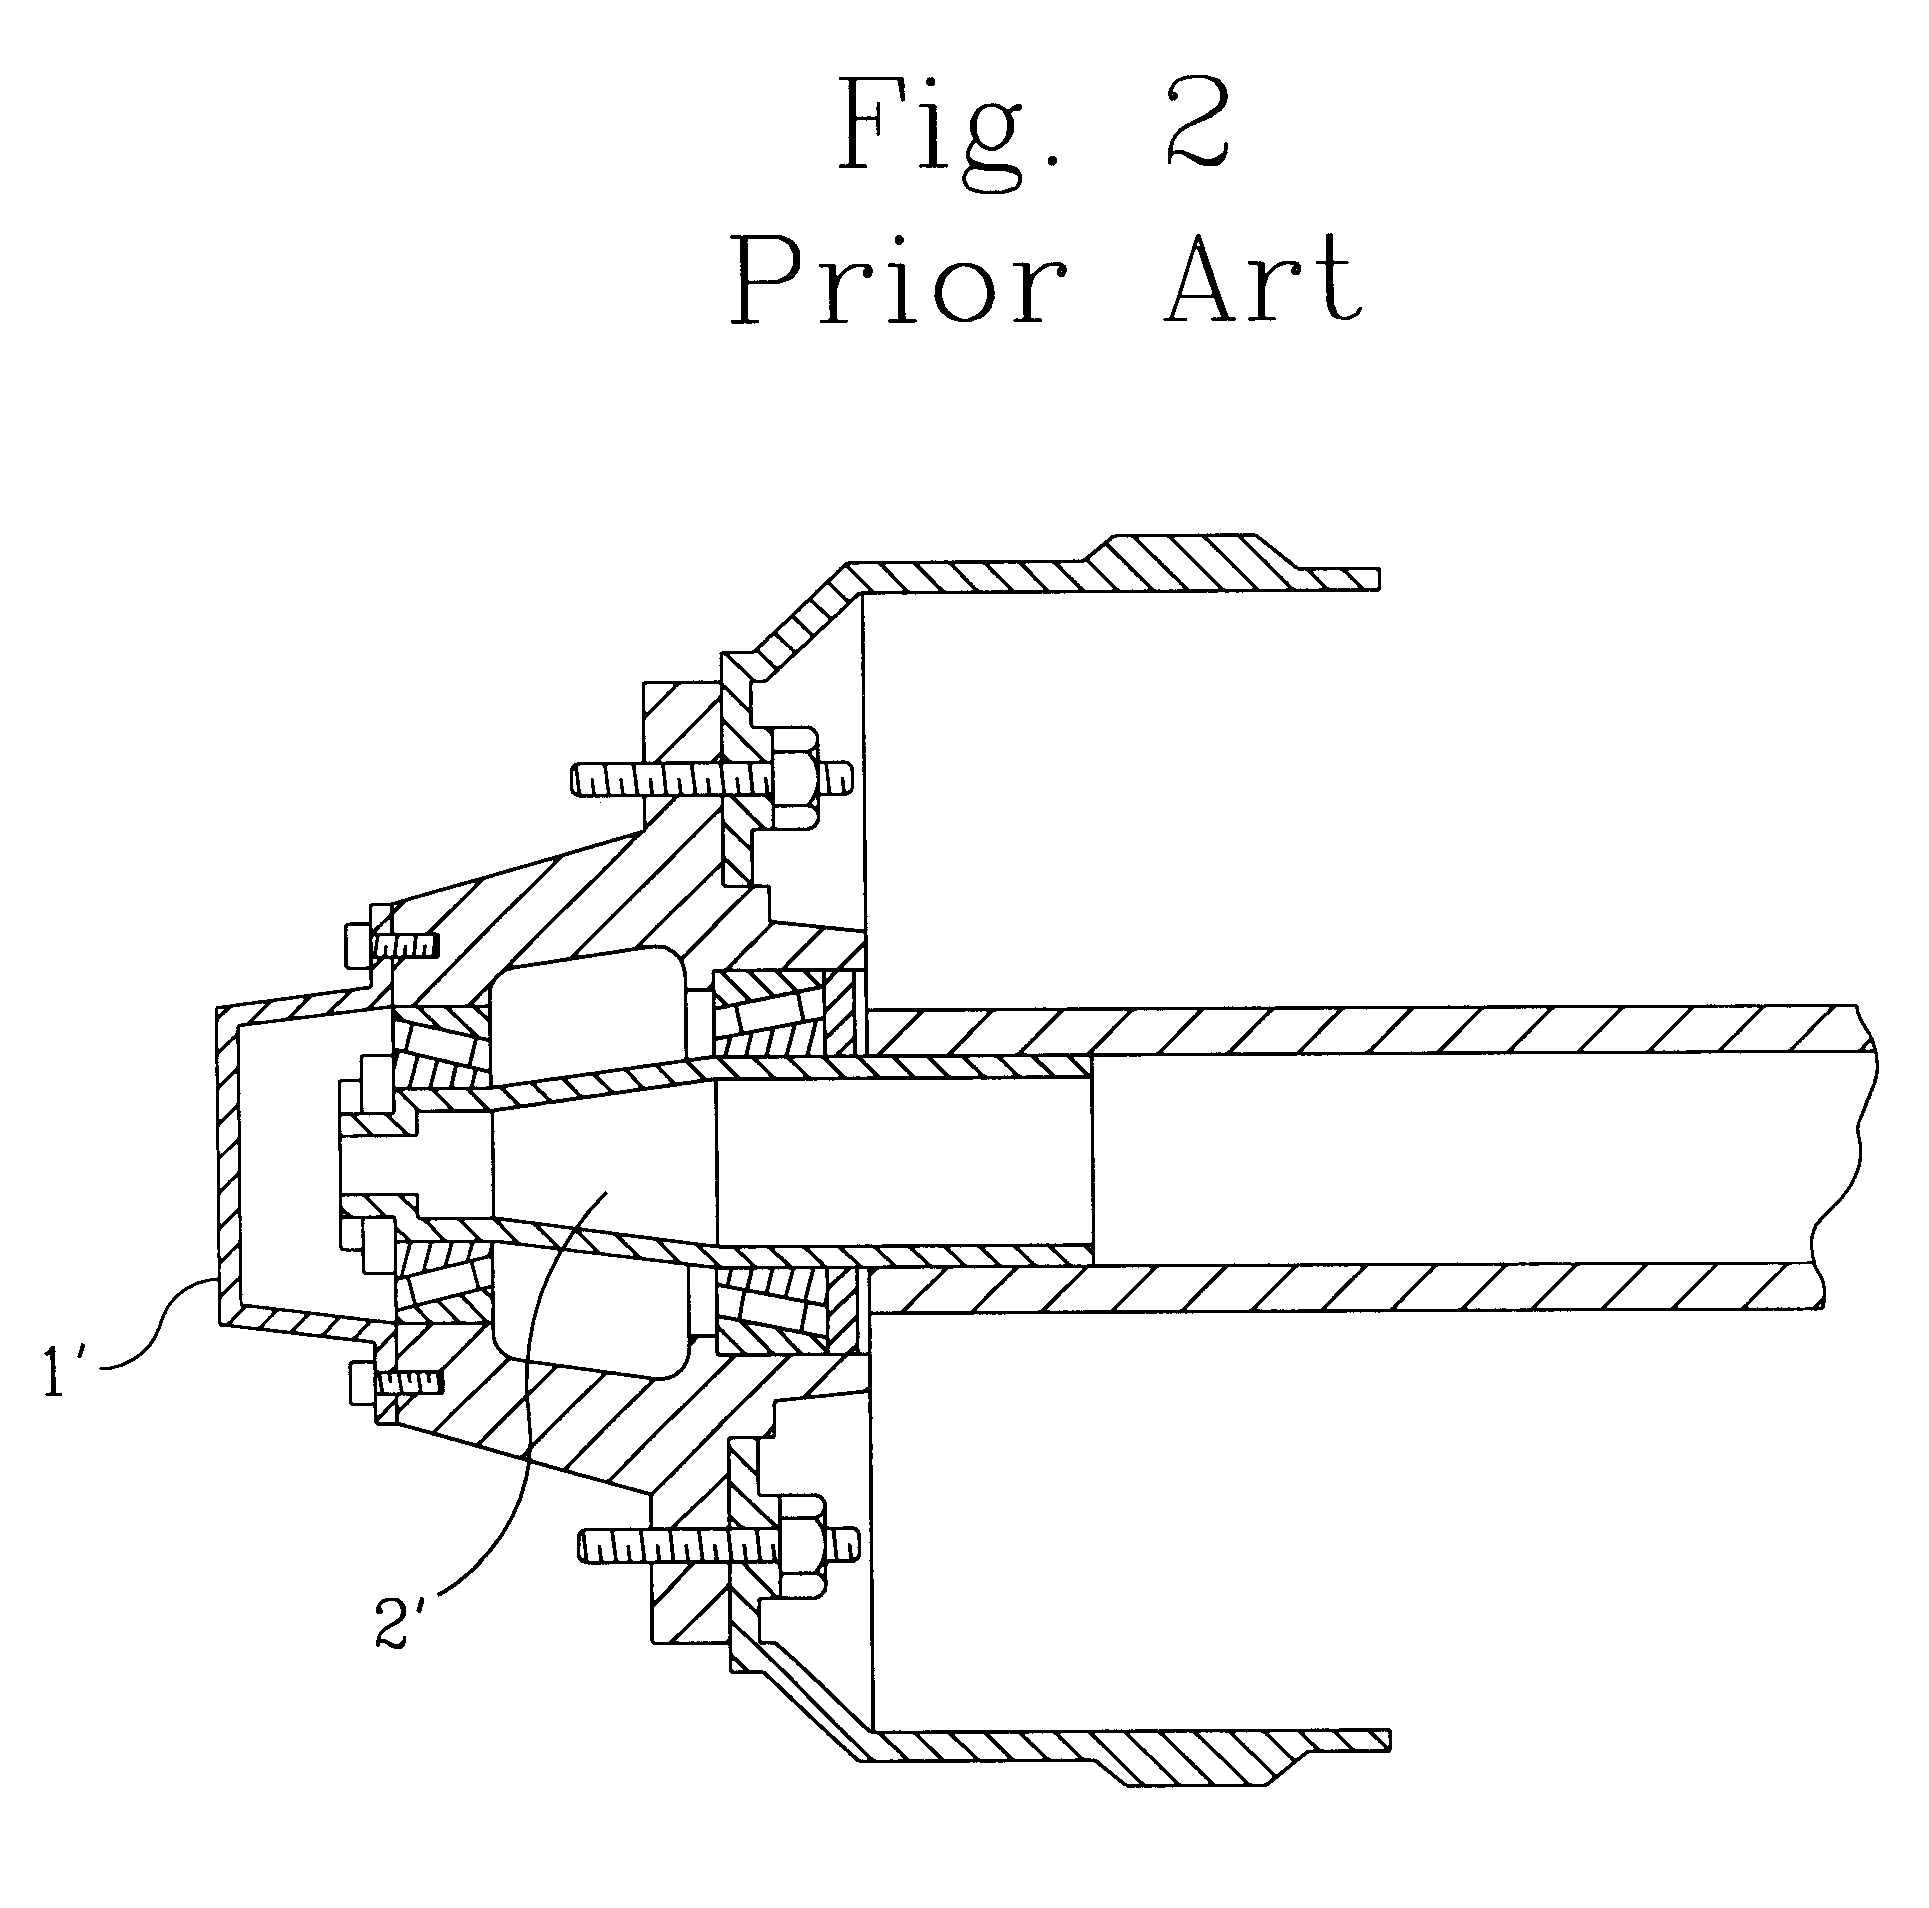 Vent system for an axle and hub assembly